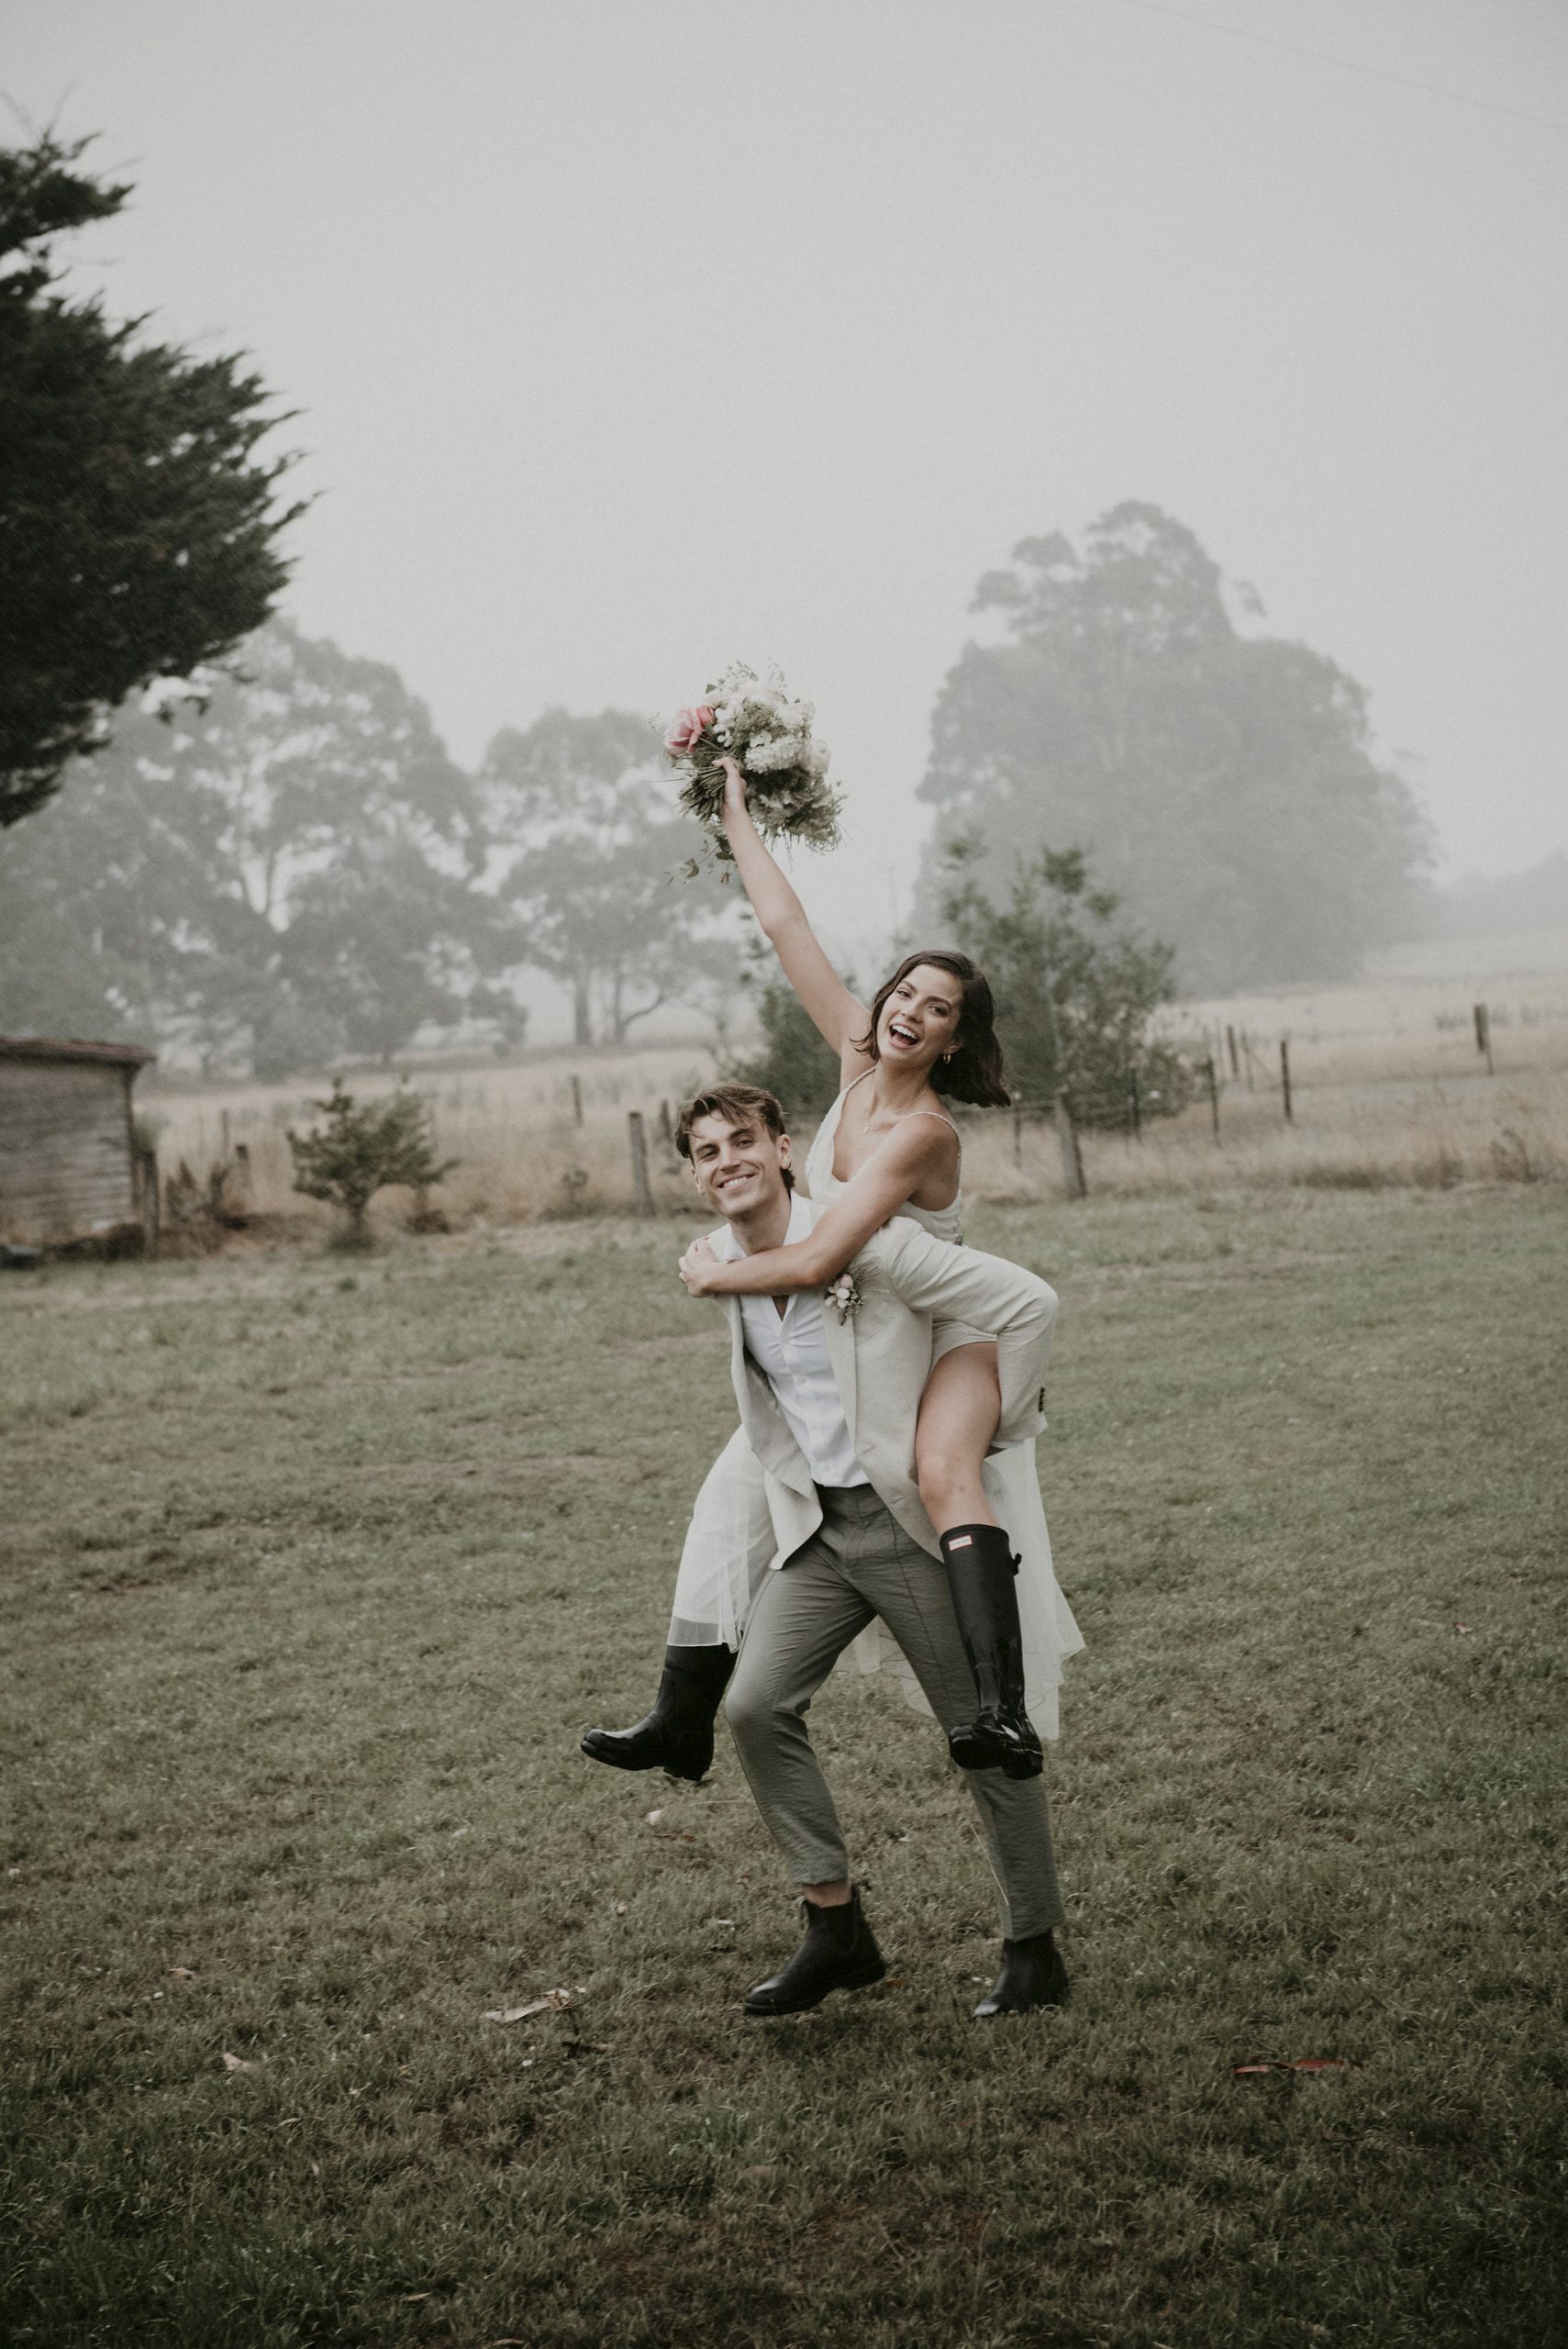 Let's Elope Melbourne Portfolio Celebrant Photographer Elopement Packages Victoria Sarah Matler Photography Acre of Roses Trentham Moody intimate wedding